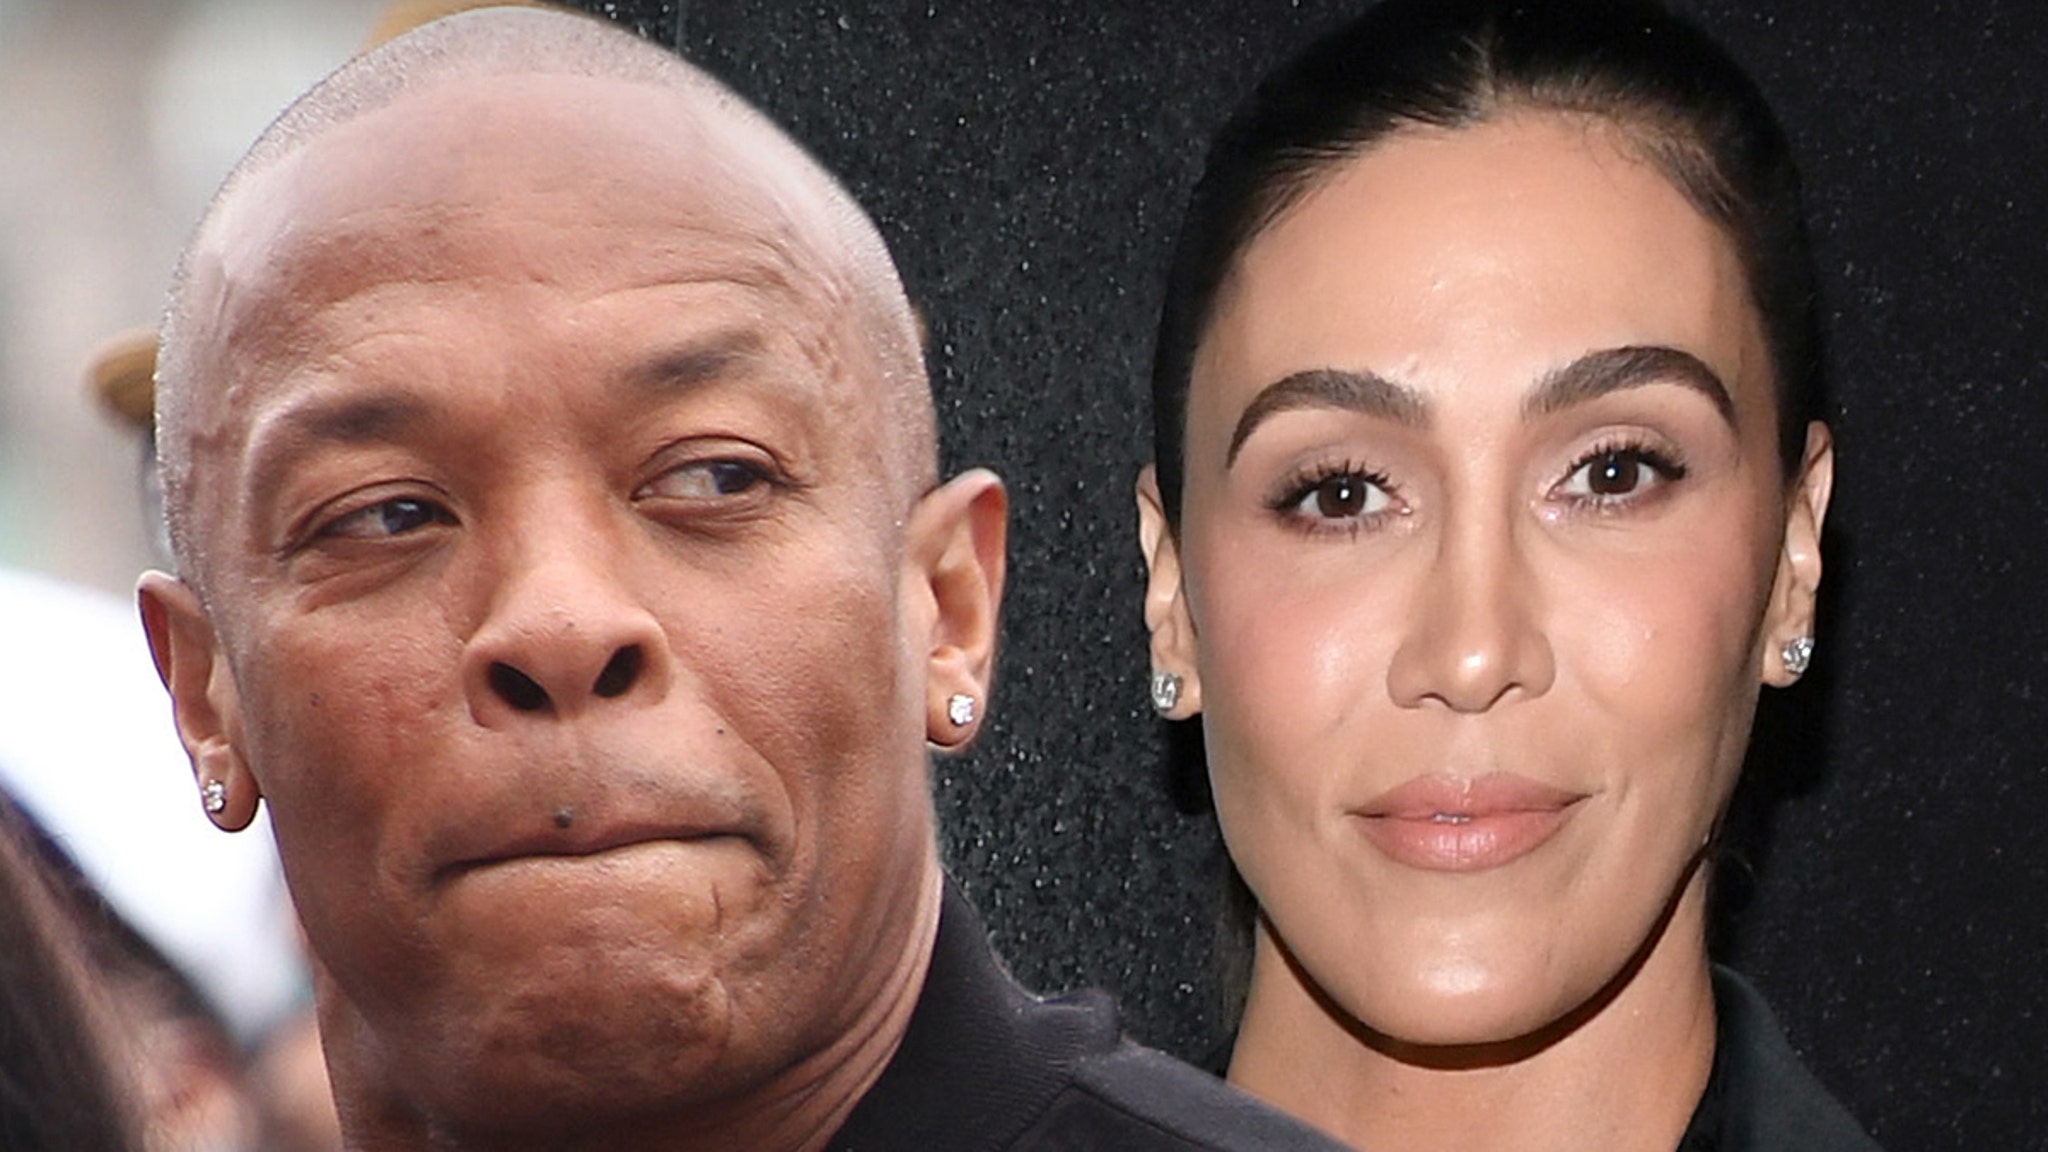 Dr. Dre asks the judge to declare him single in the midst of an unpleasant divorce